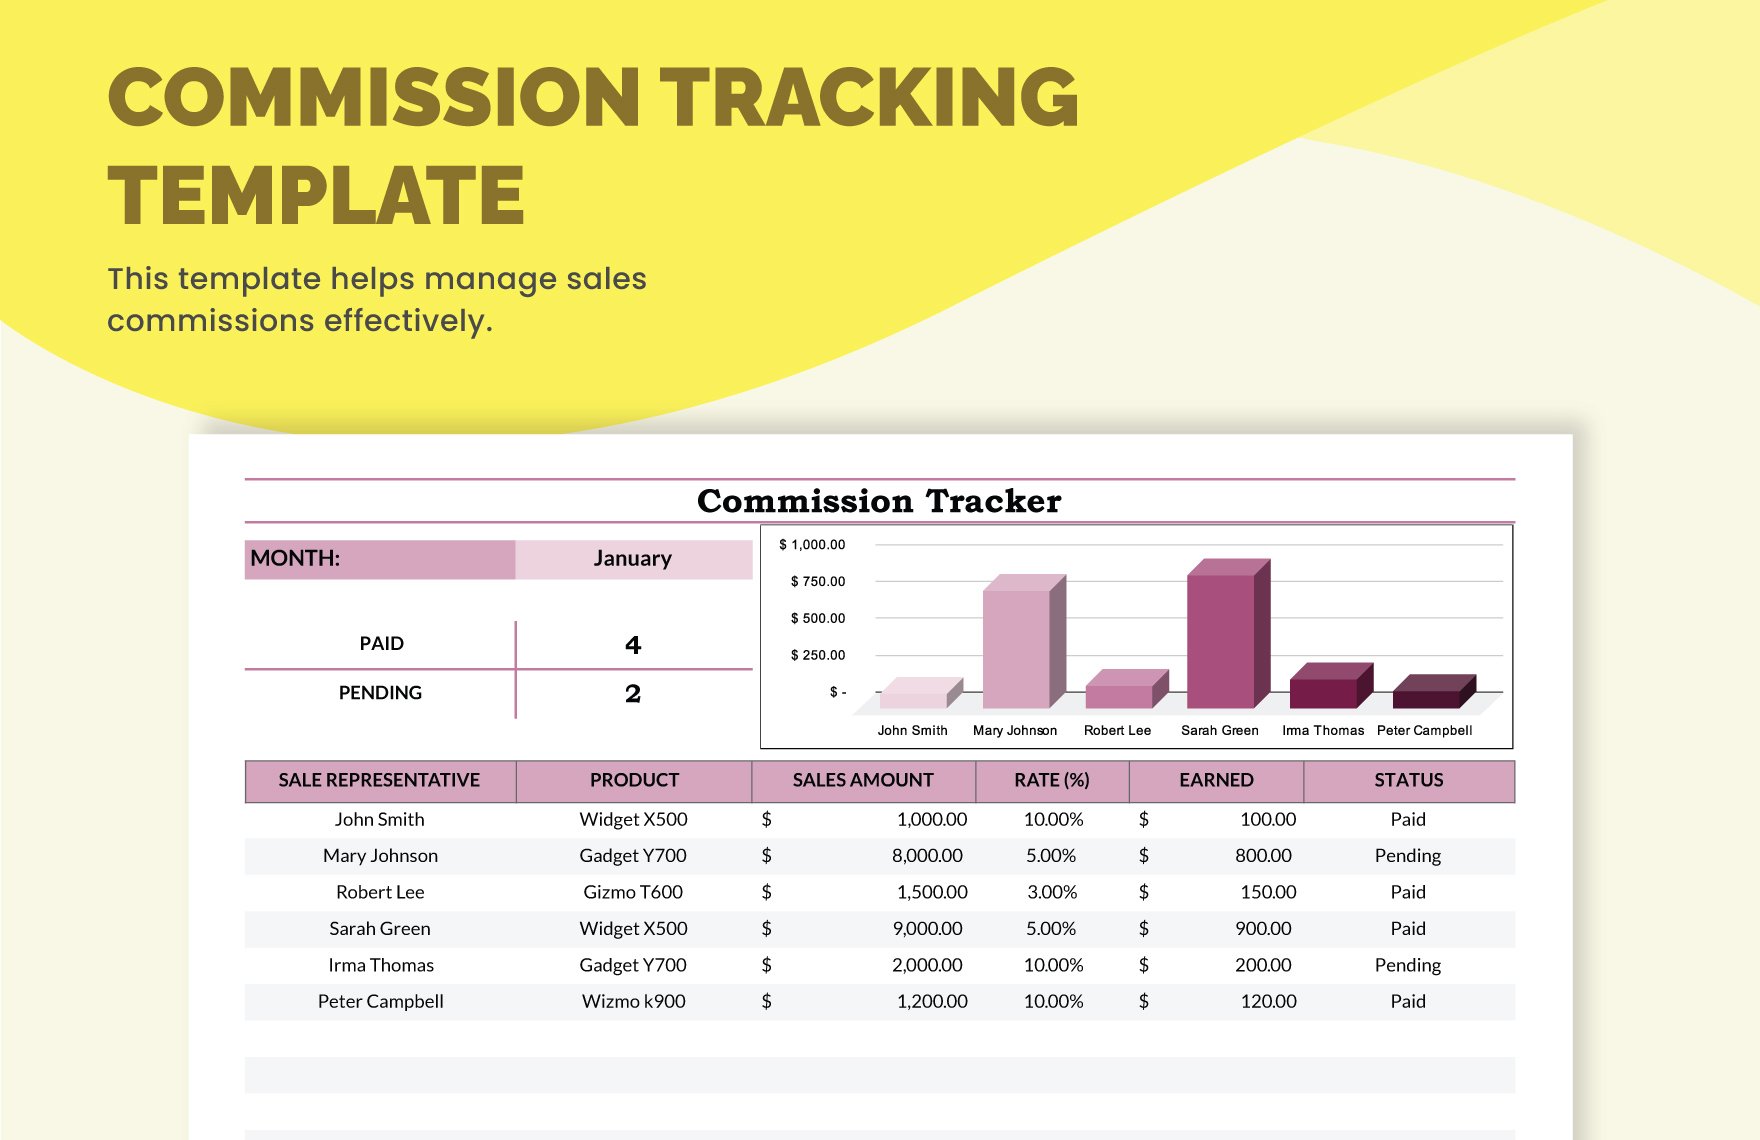 Commission Tracking Template